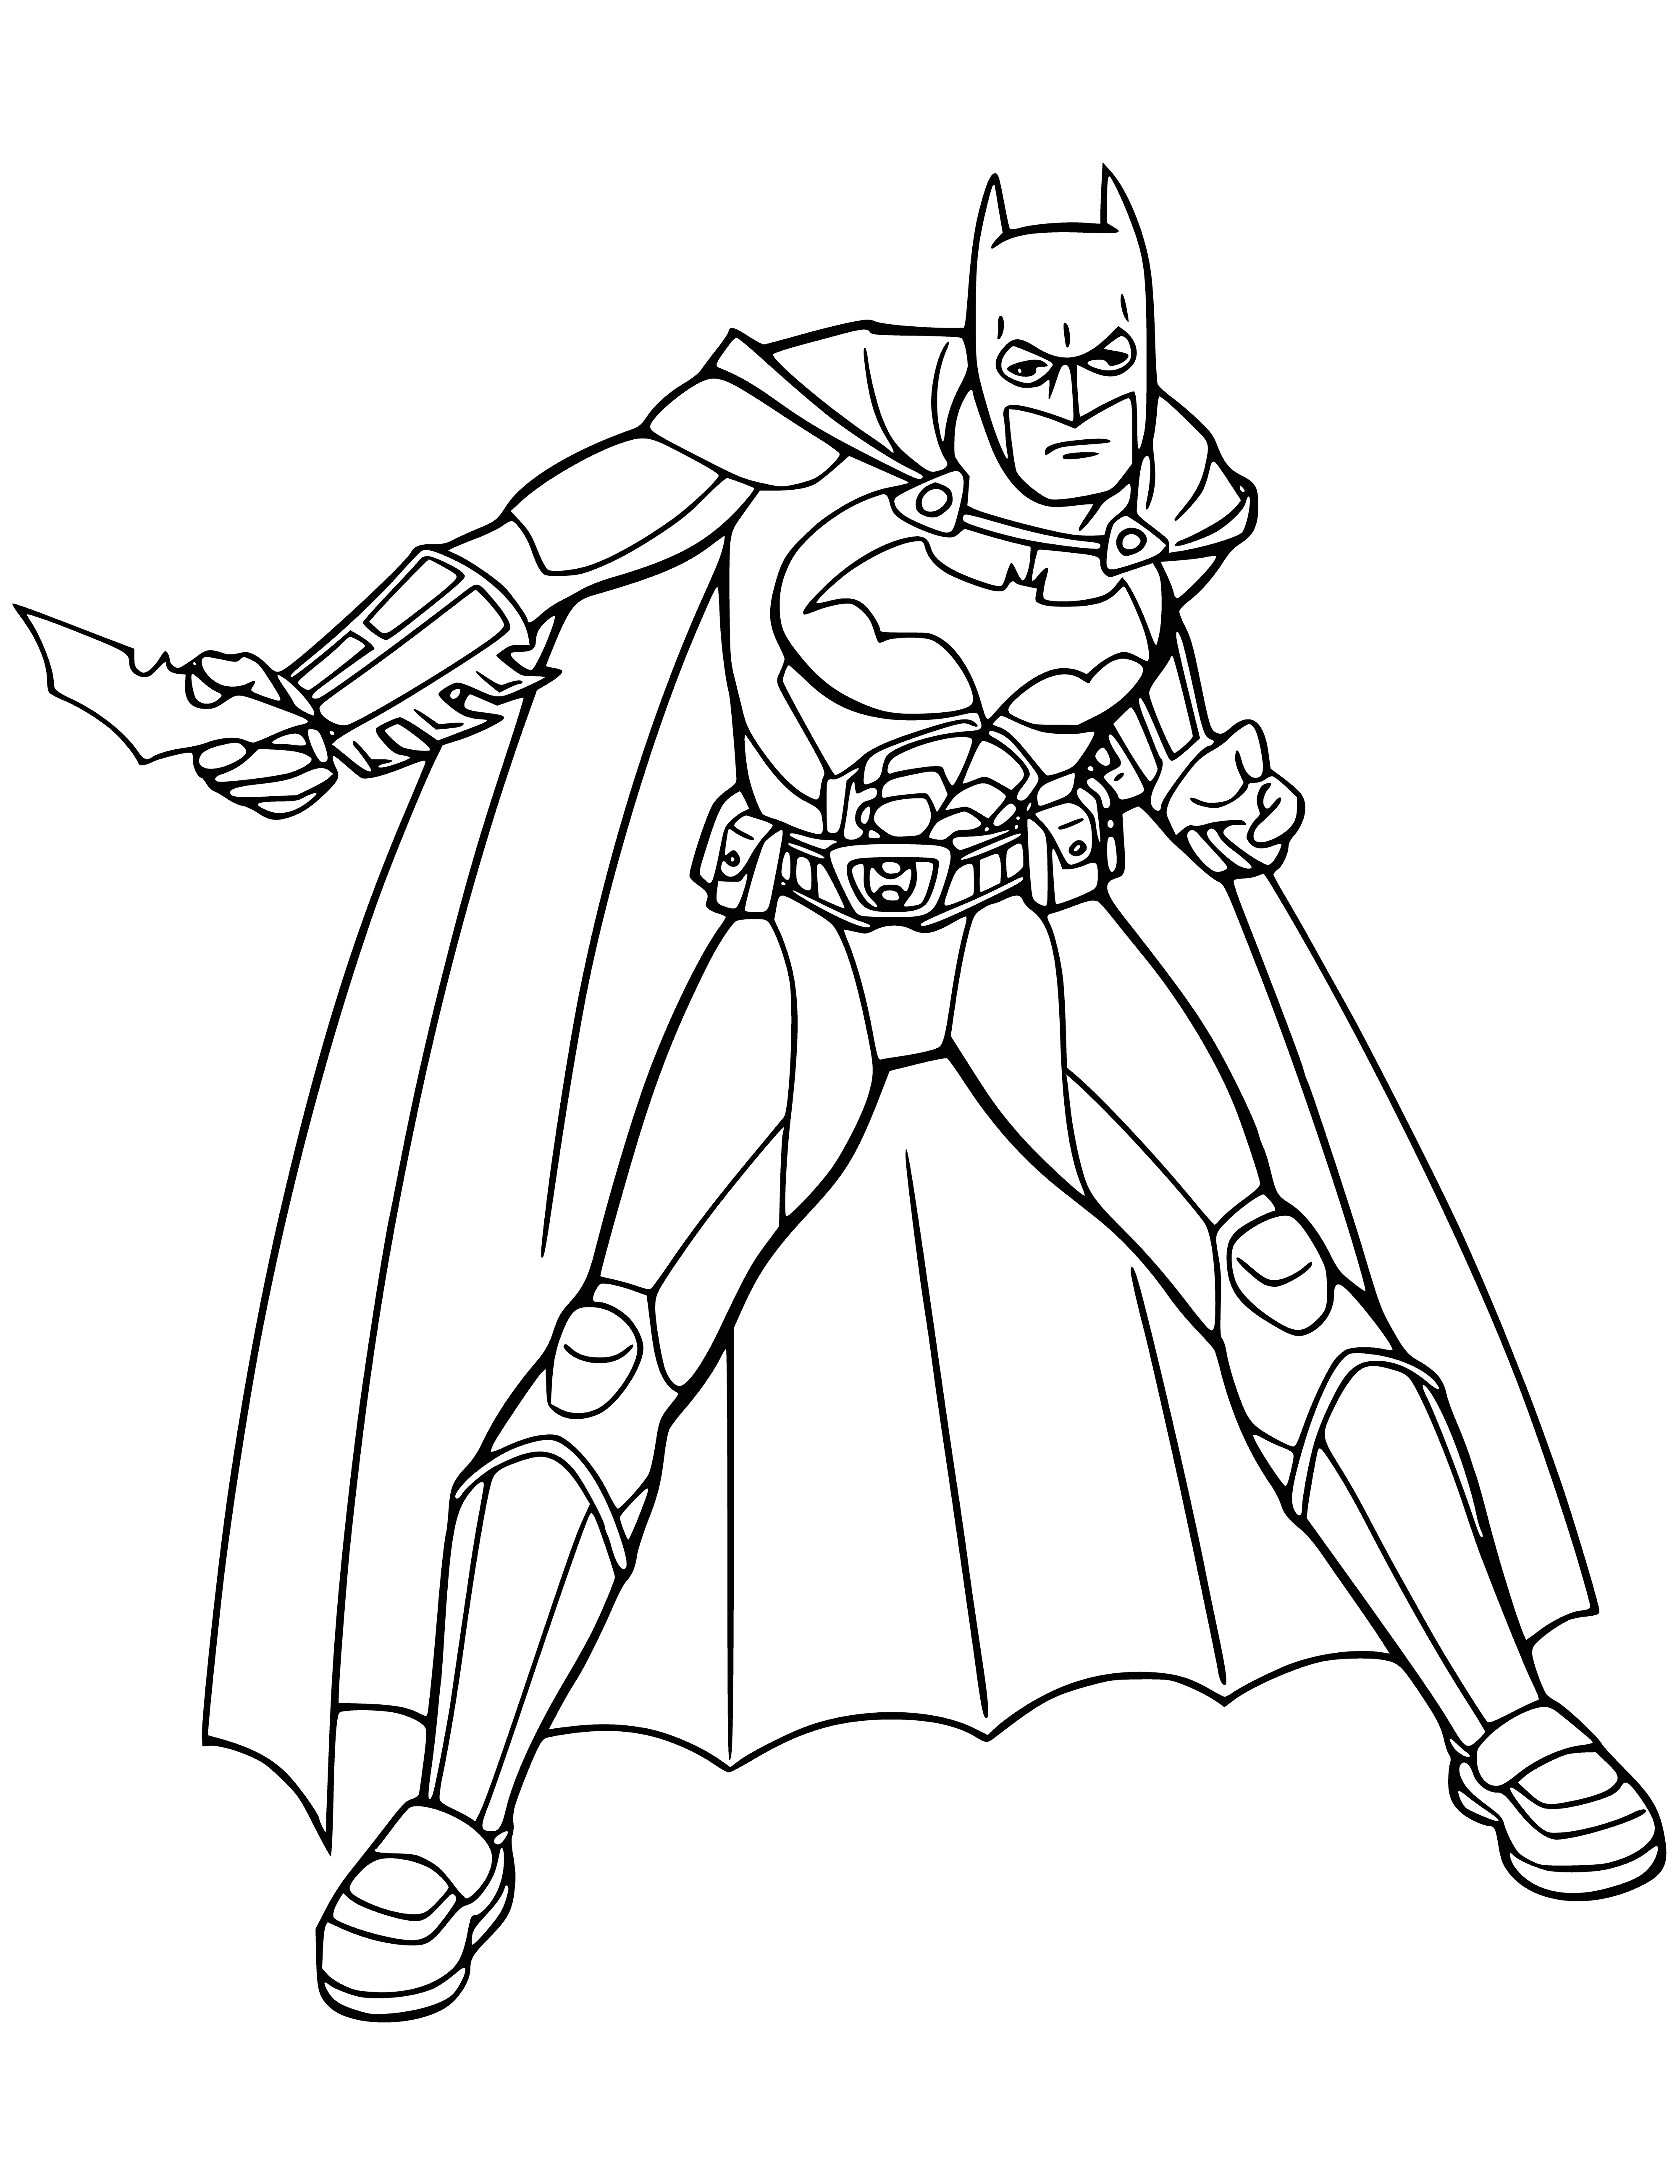 coloring page: Man in black suit, gloves, boots and cowl stands atop a rooftop - eyes cold and piercing. #DarkKnight #Gotham